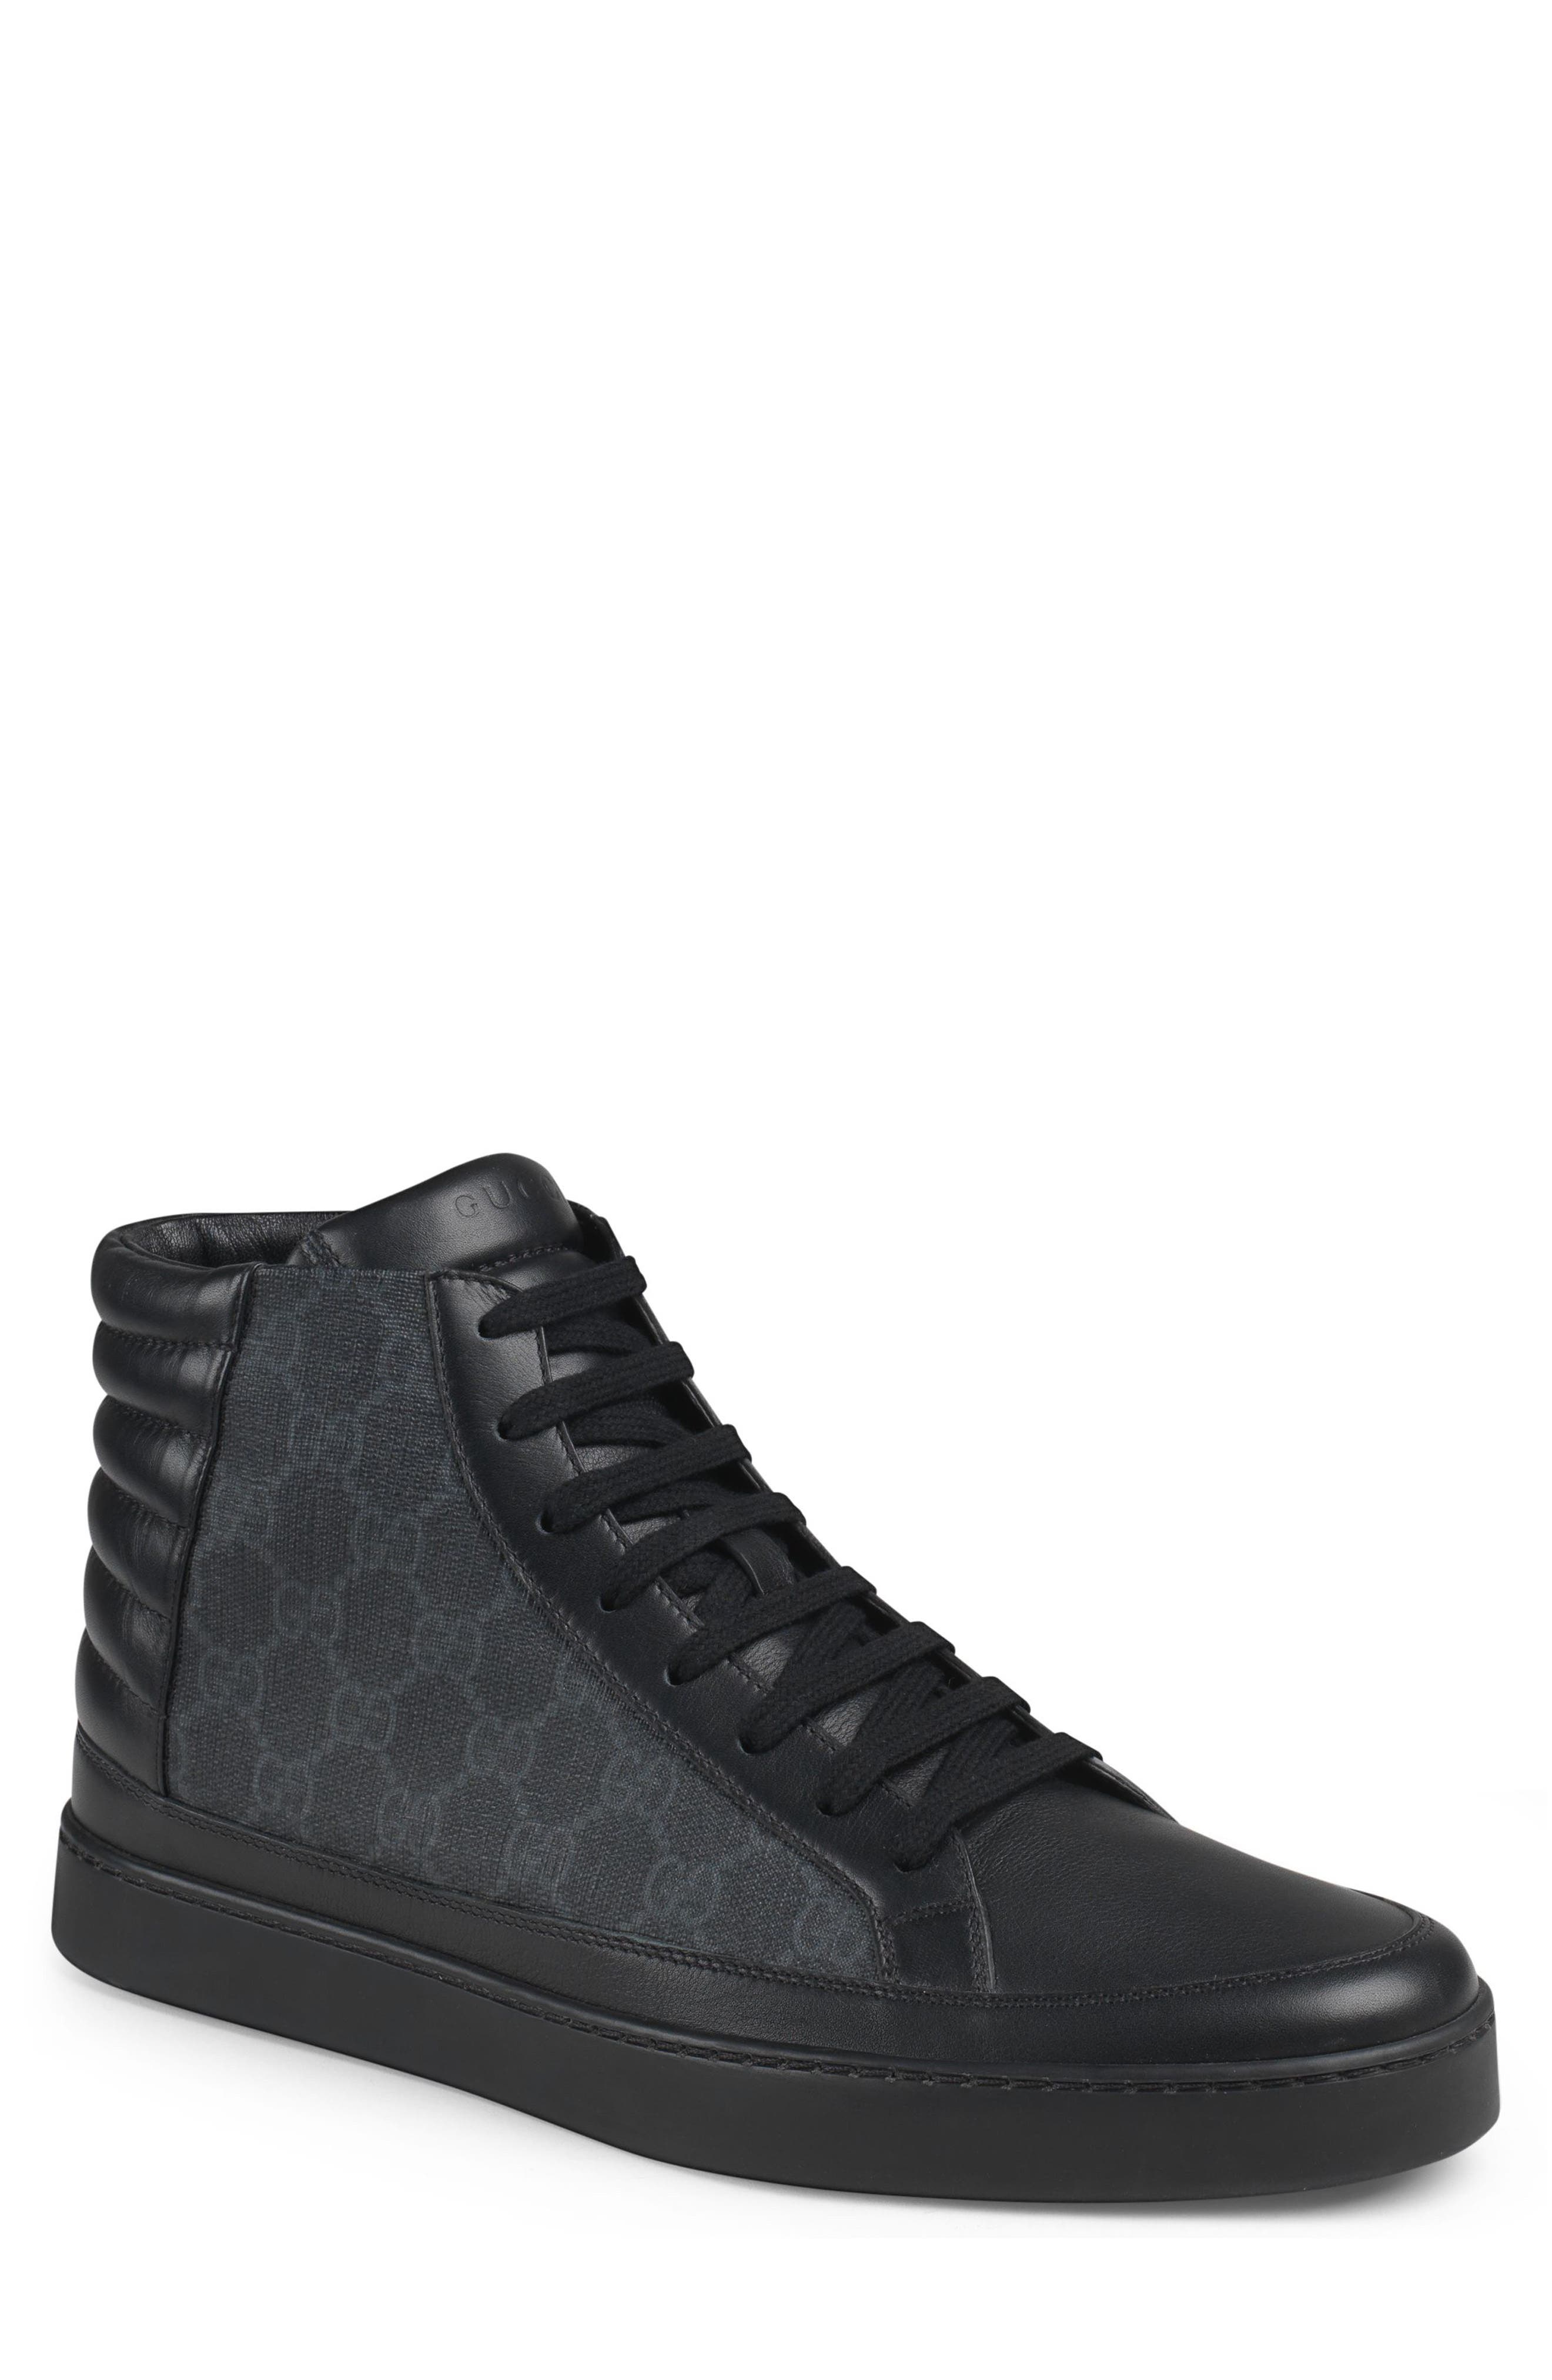 gucci high top black sneakers